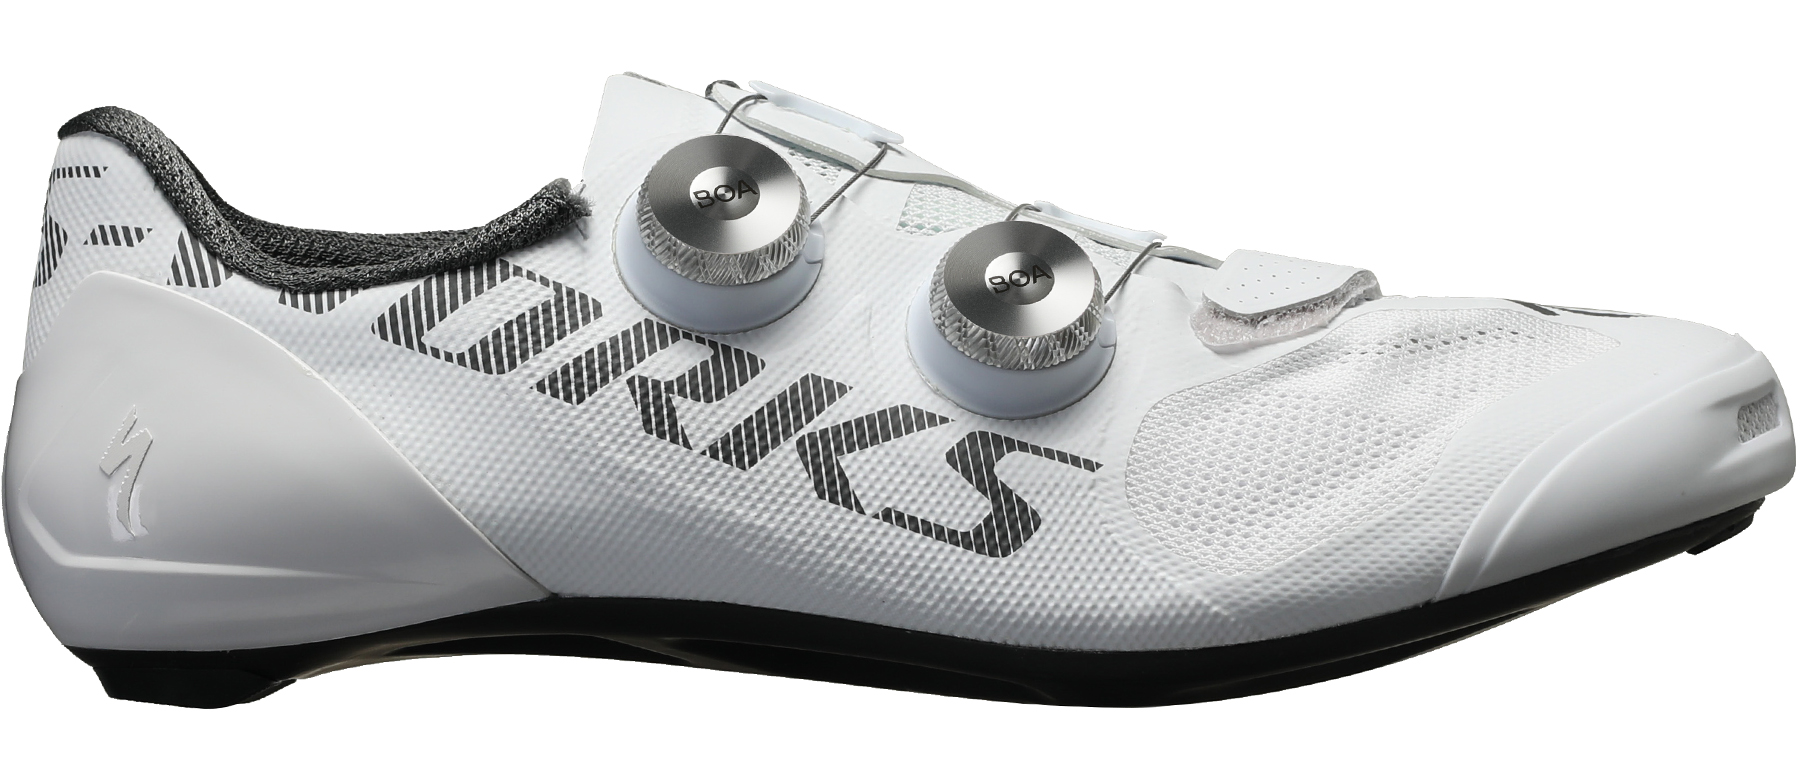 New Specialized Pro Women's Road Bike Cycling Shoes 39 8.5 3-Bolt Carbon White 